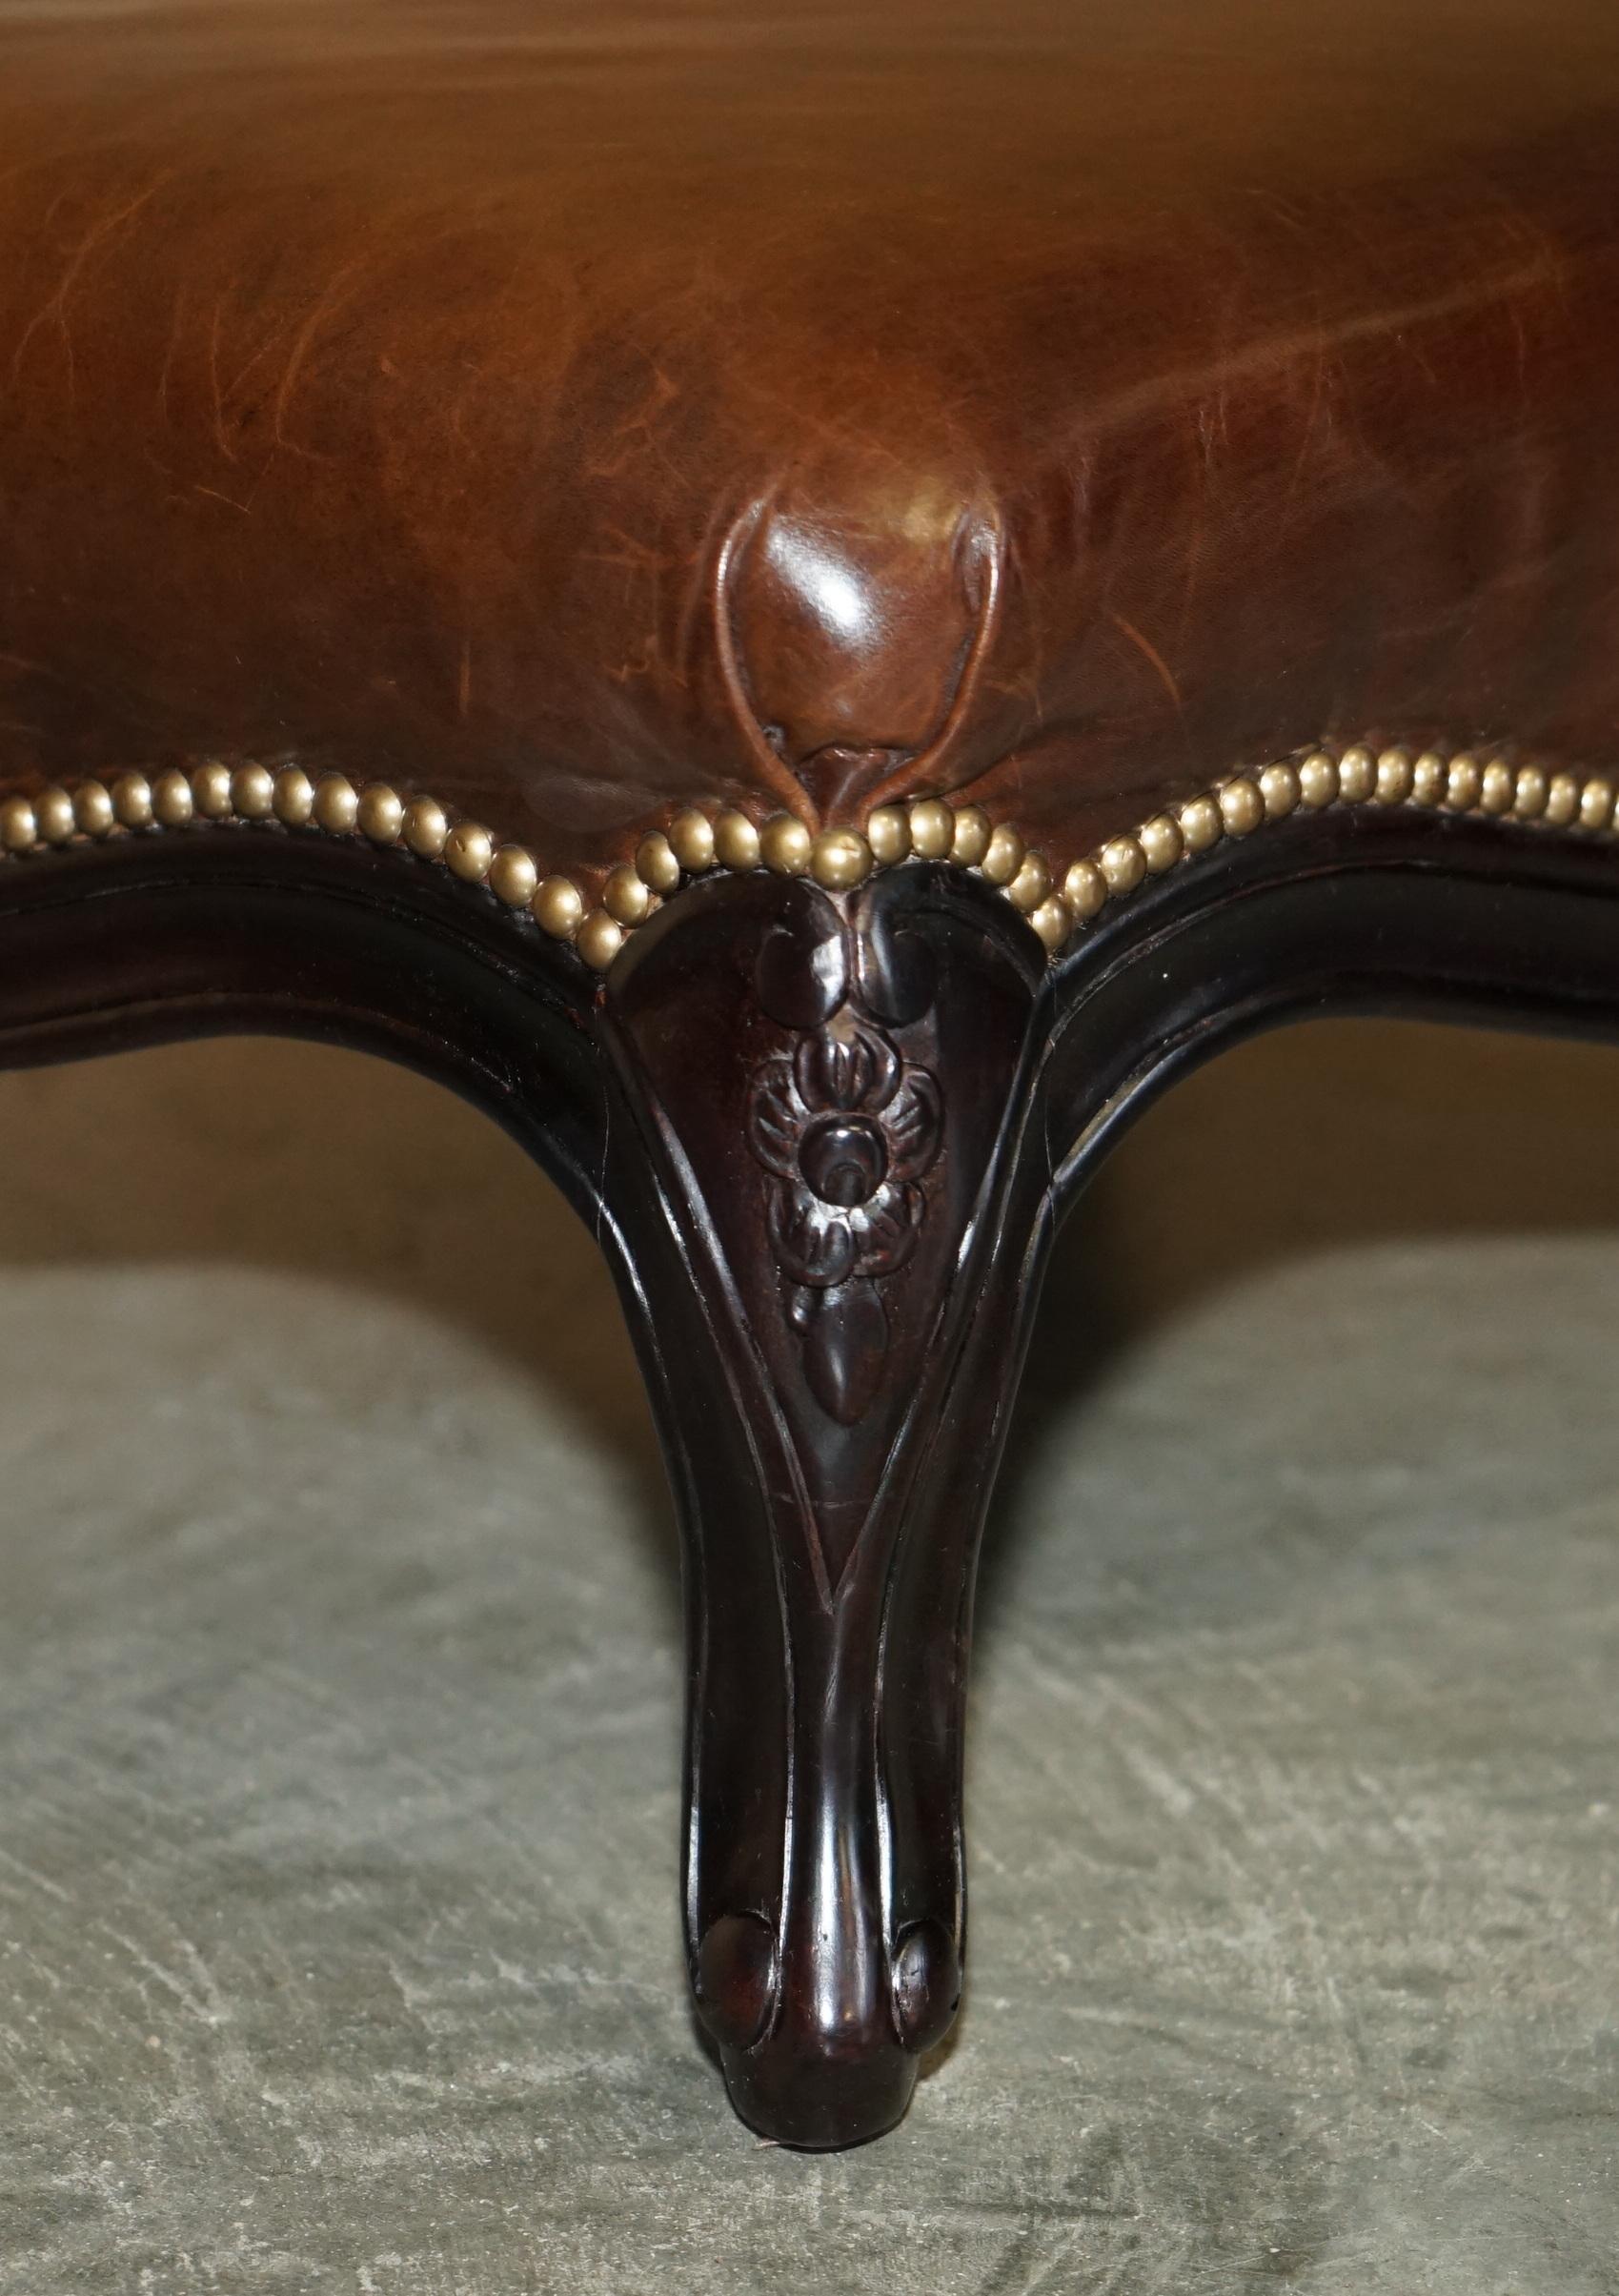 STUNNiNG VINTAGE FRENCH STYLE RALPH LAUREN BROWN LEATHER FOOTSTOOL OTTOMAN For Sale 4